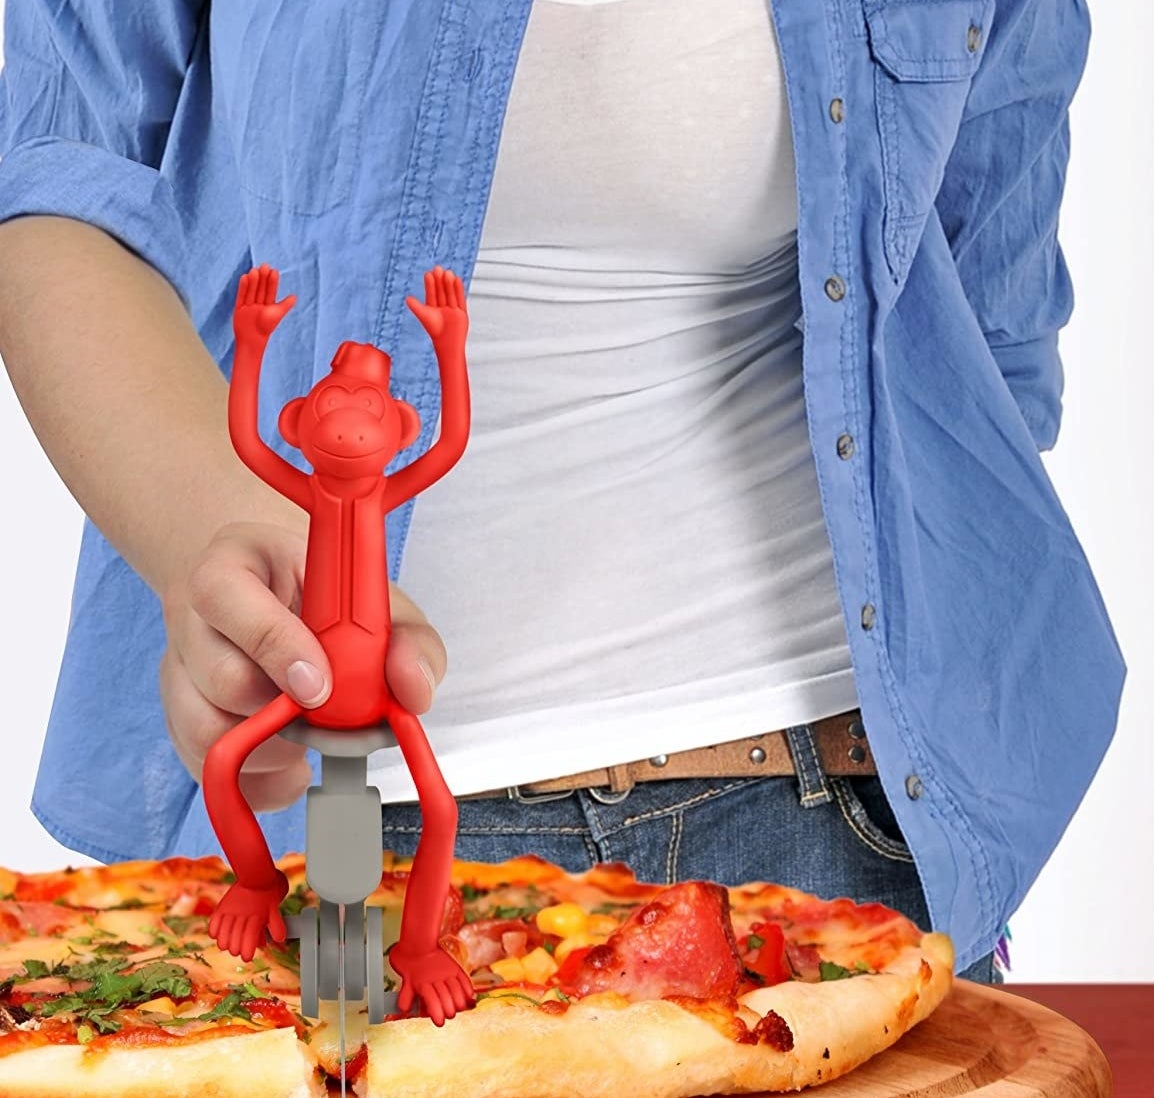 A person cutting a pizza using the product